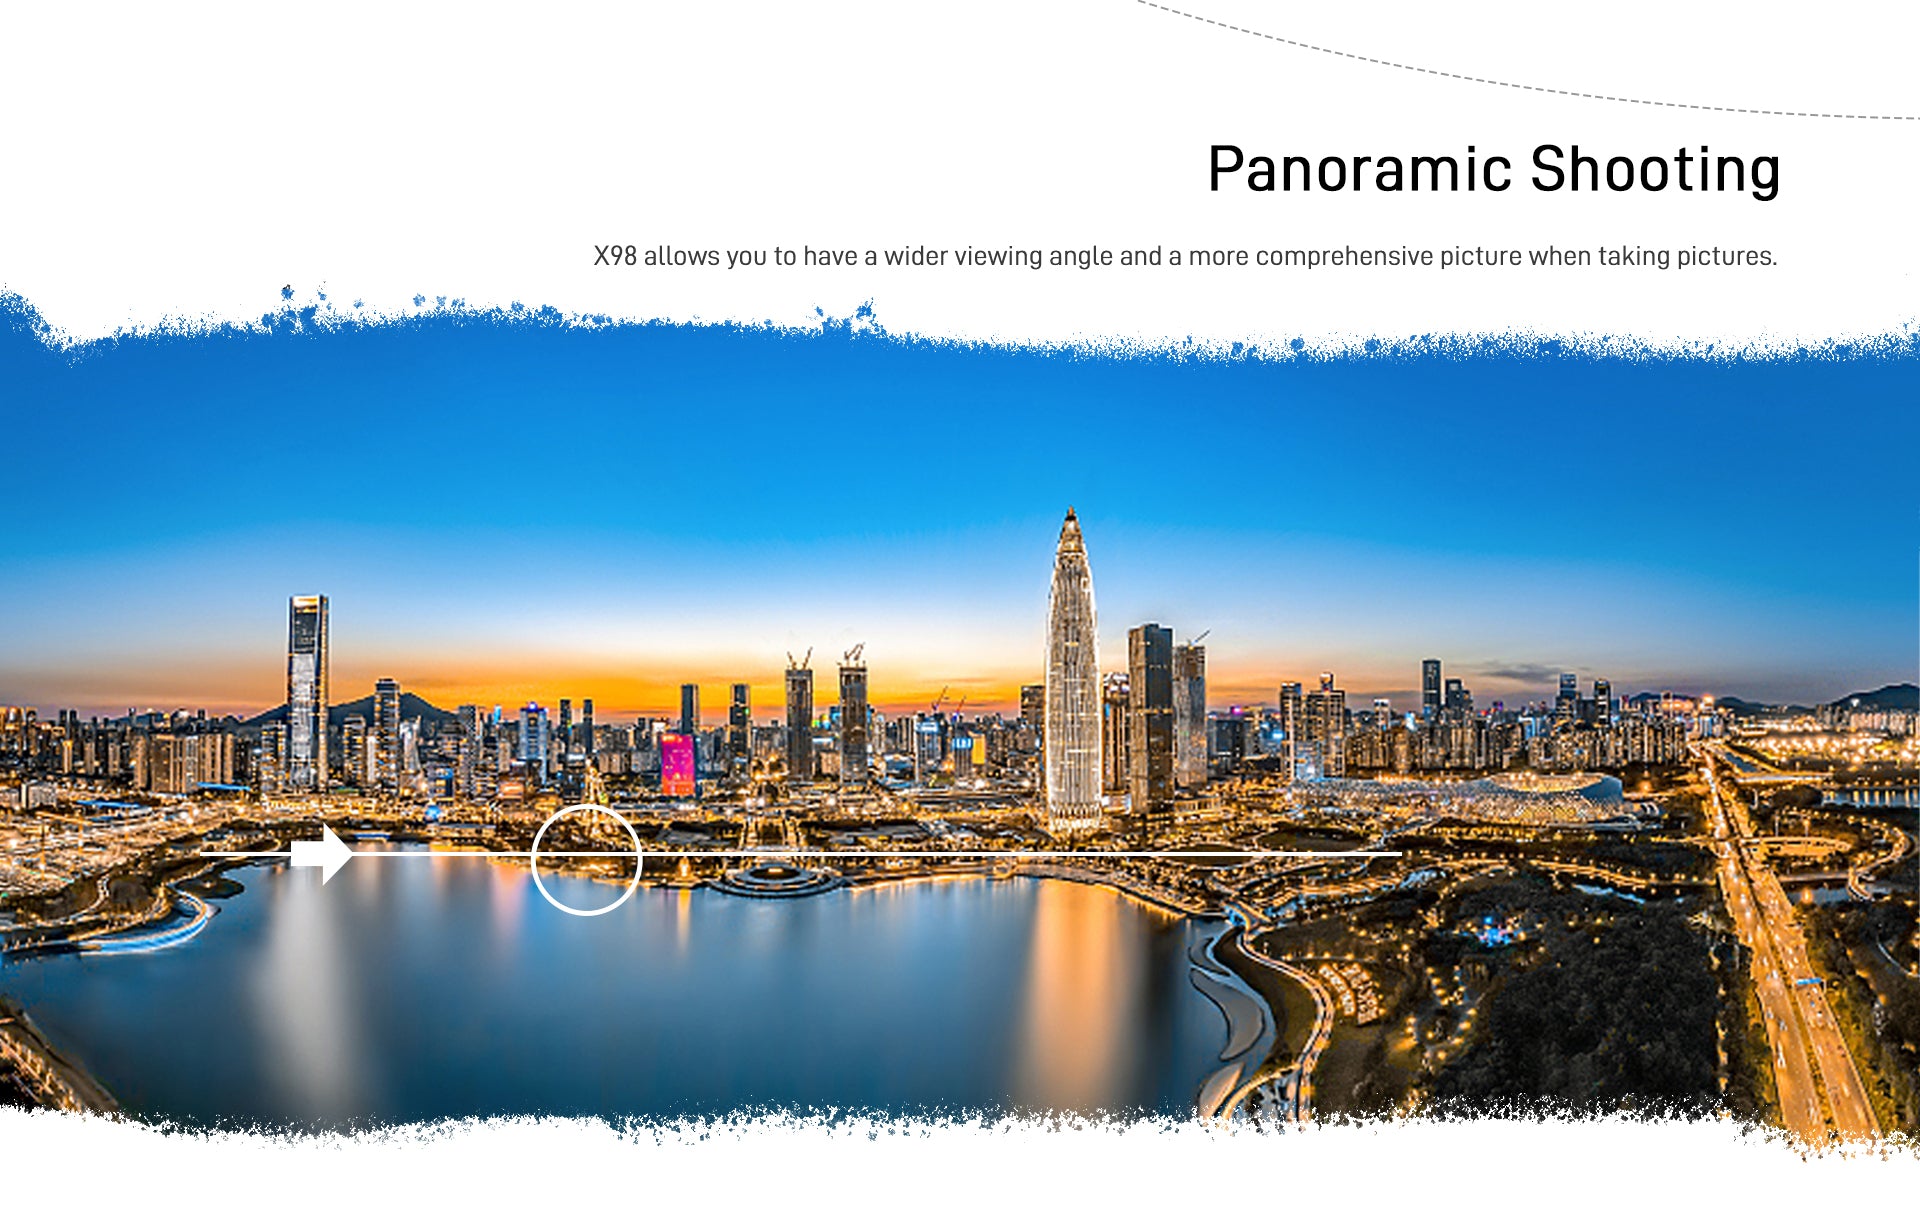 Panoramic Shooting X98 allows you to have a wider viewing angle and a more comprehensive picture when taking pictures.